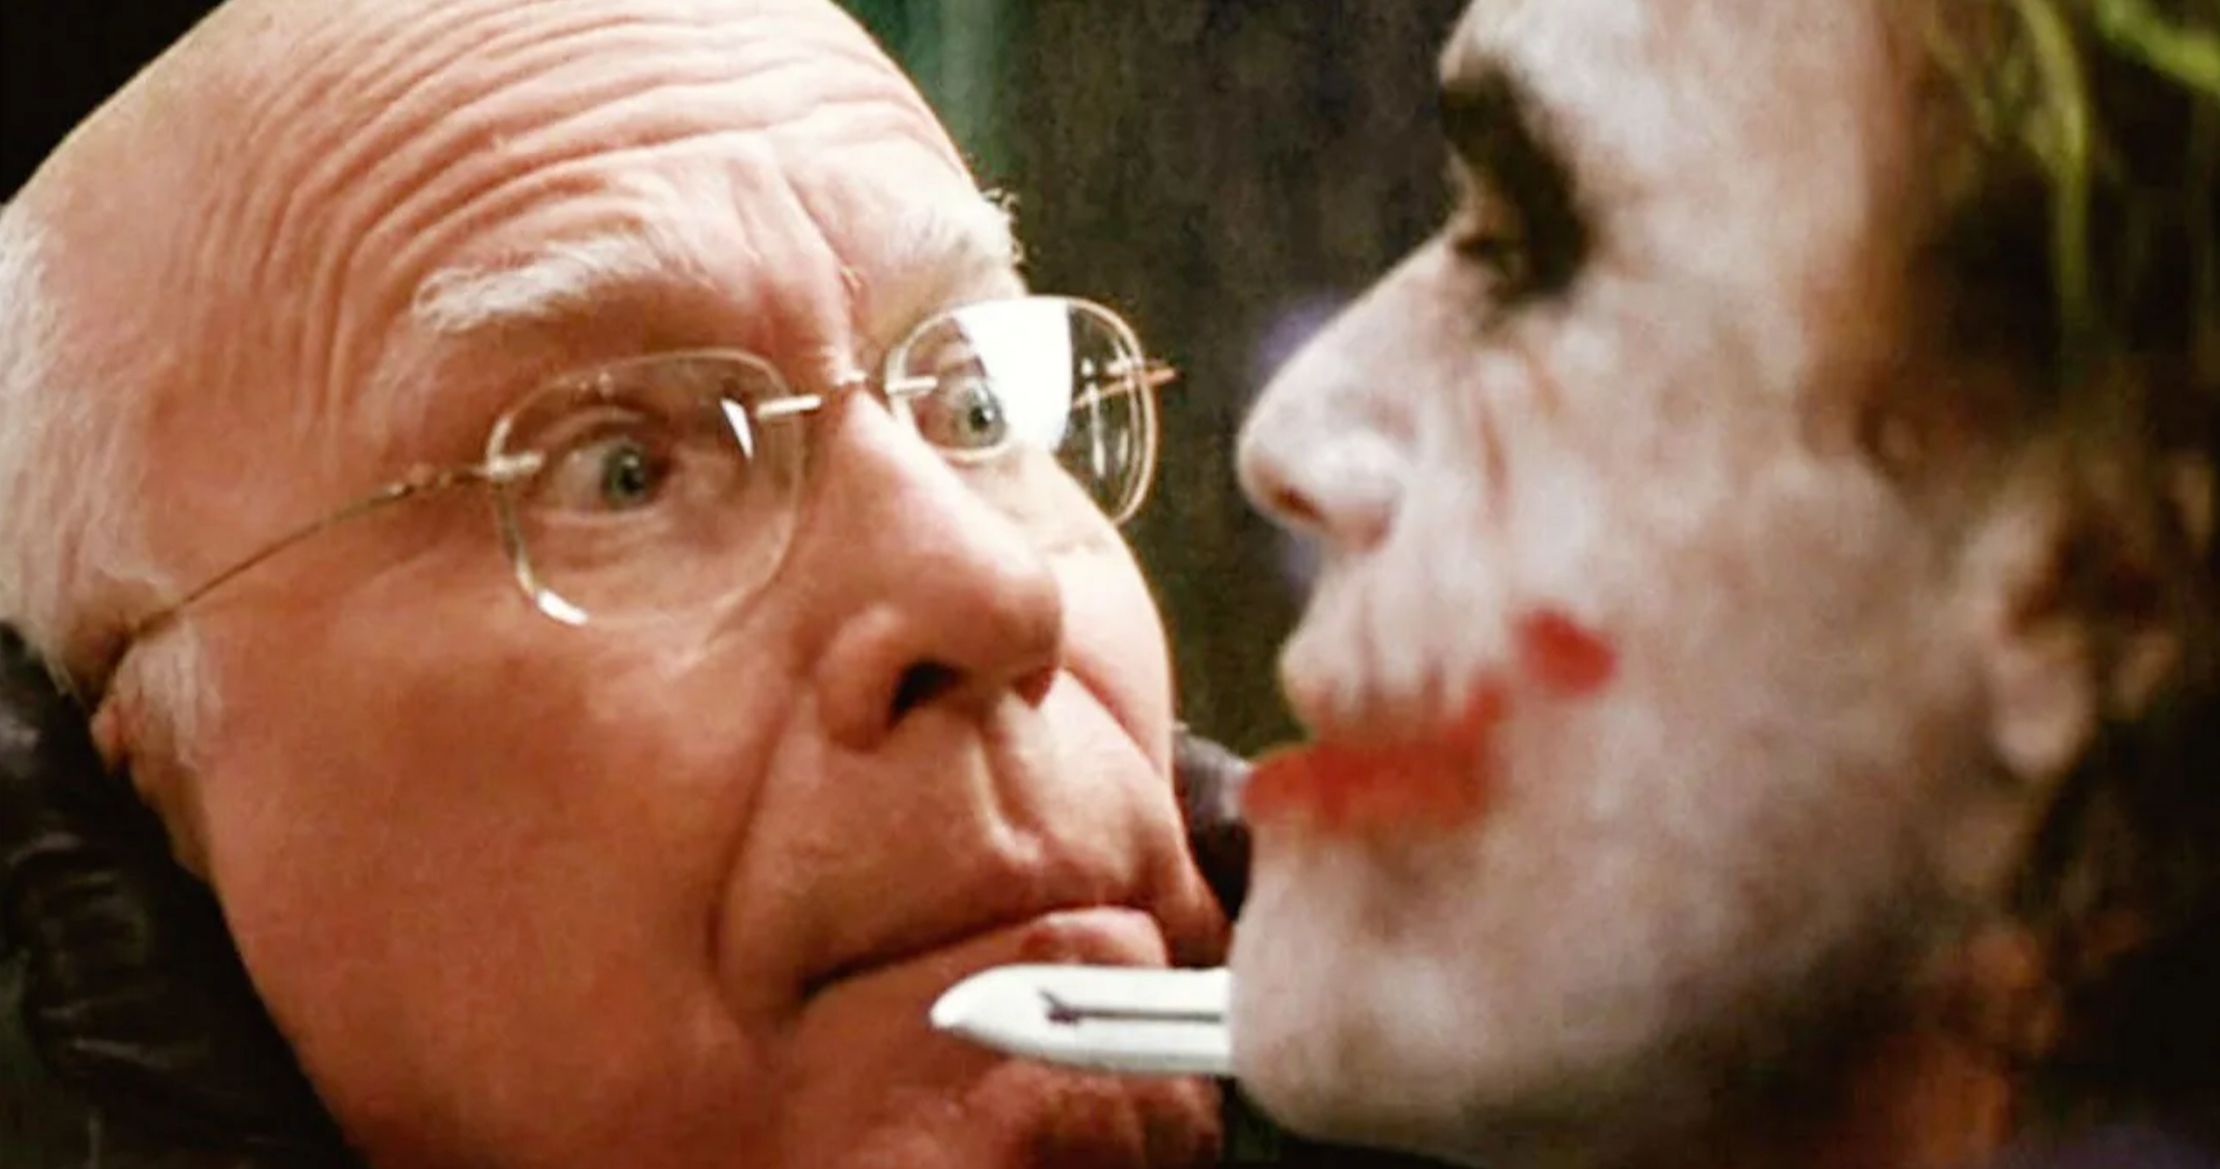 Senator Who Is Third in Line for President Has Been in Five Batman Movies